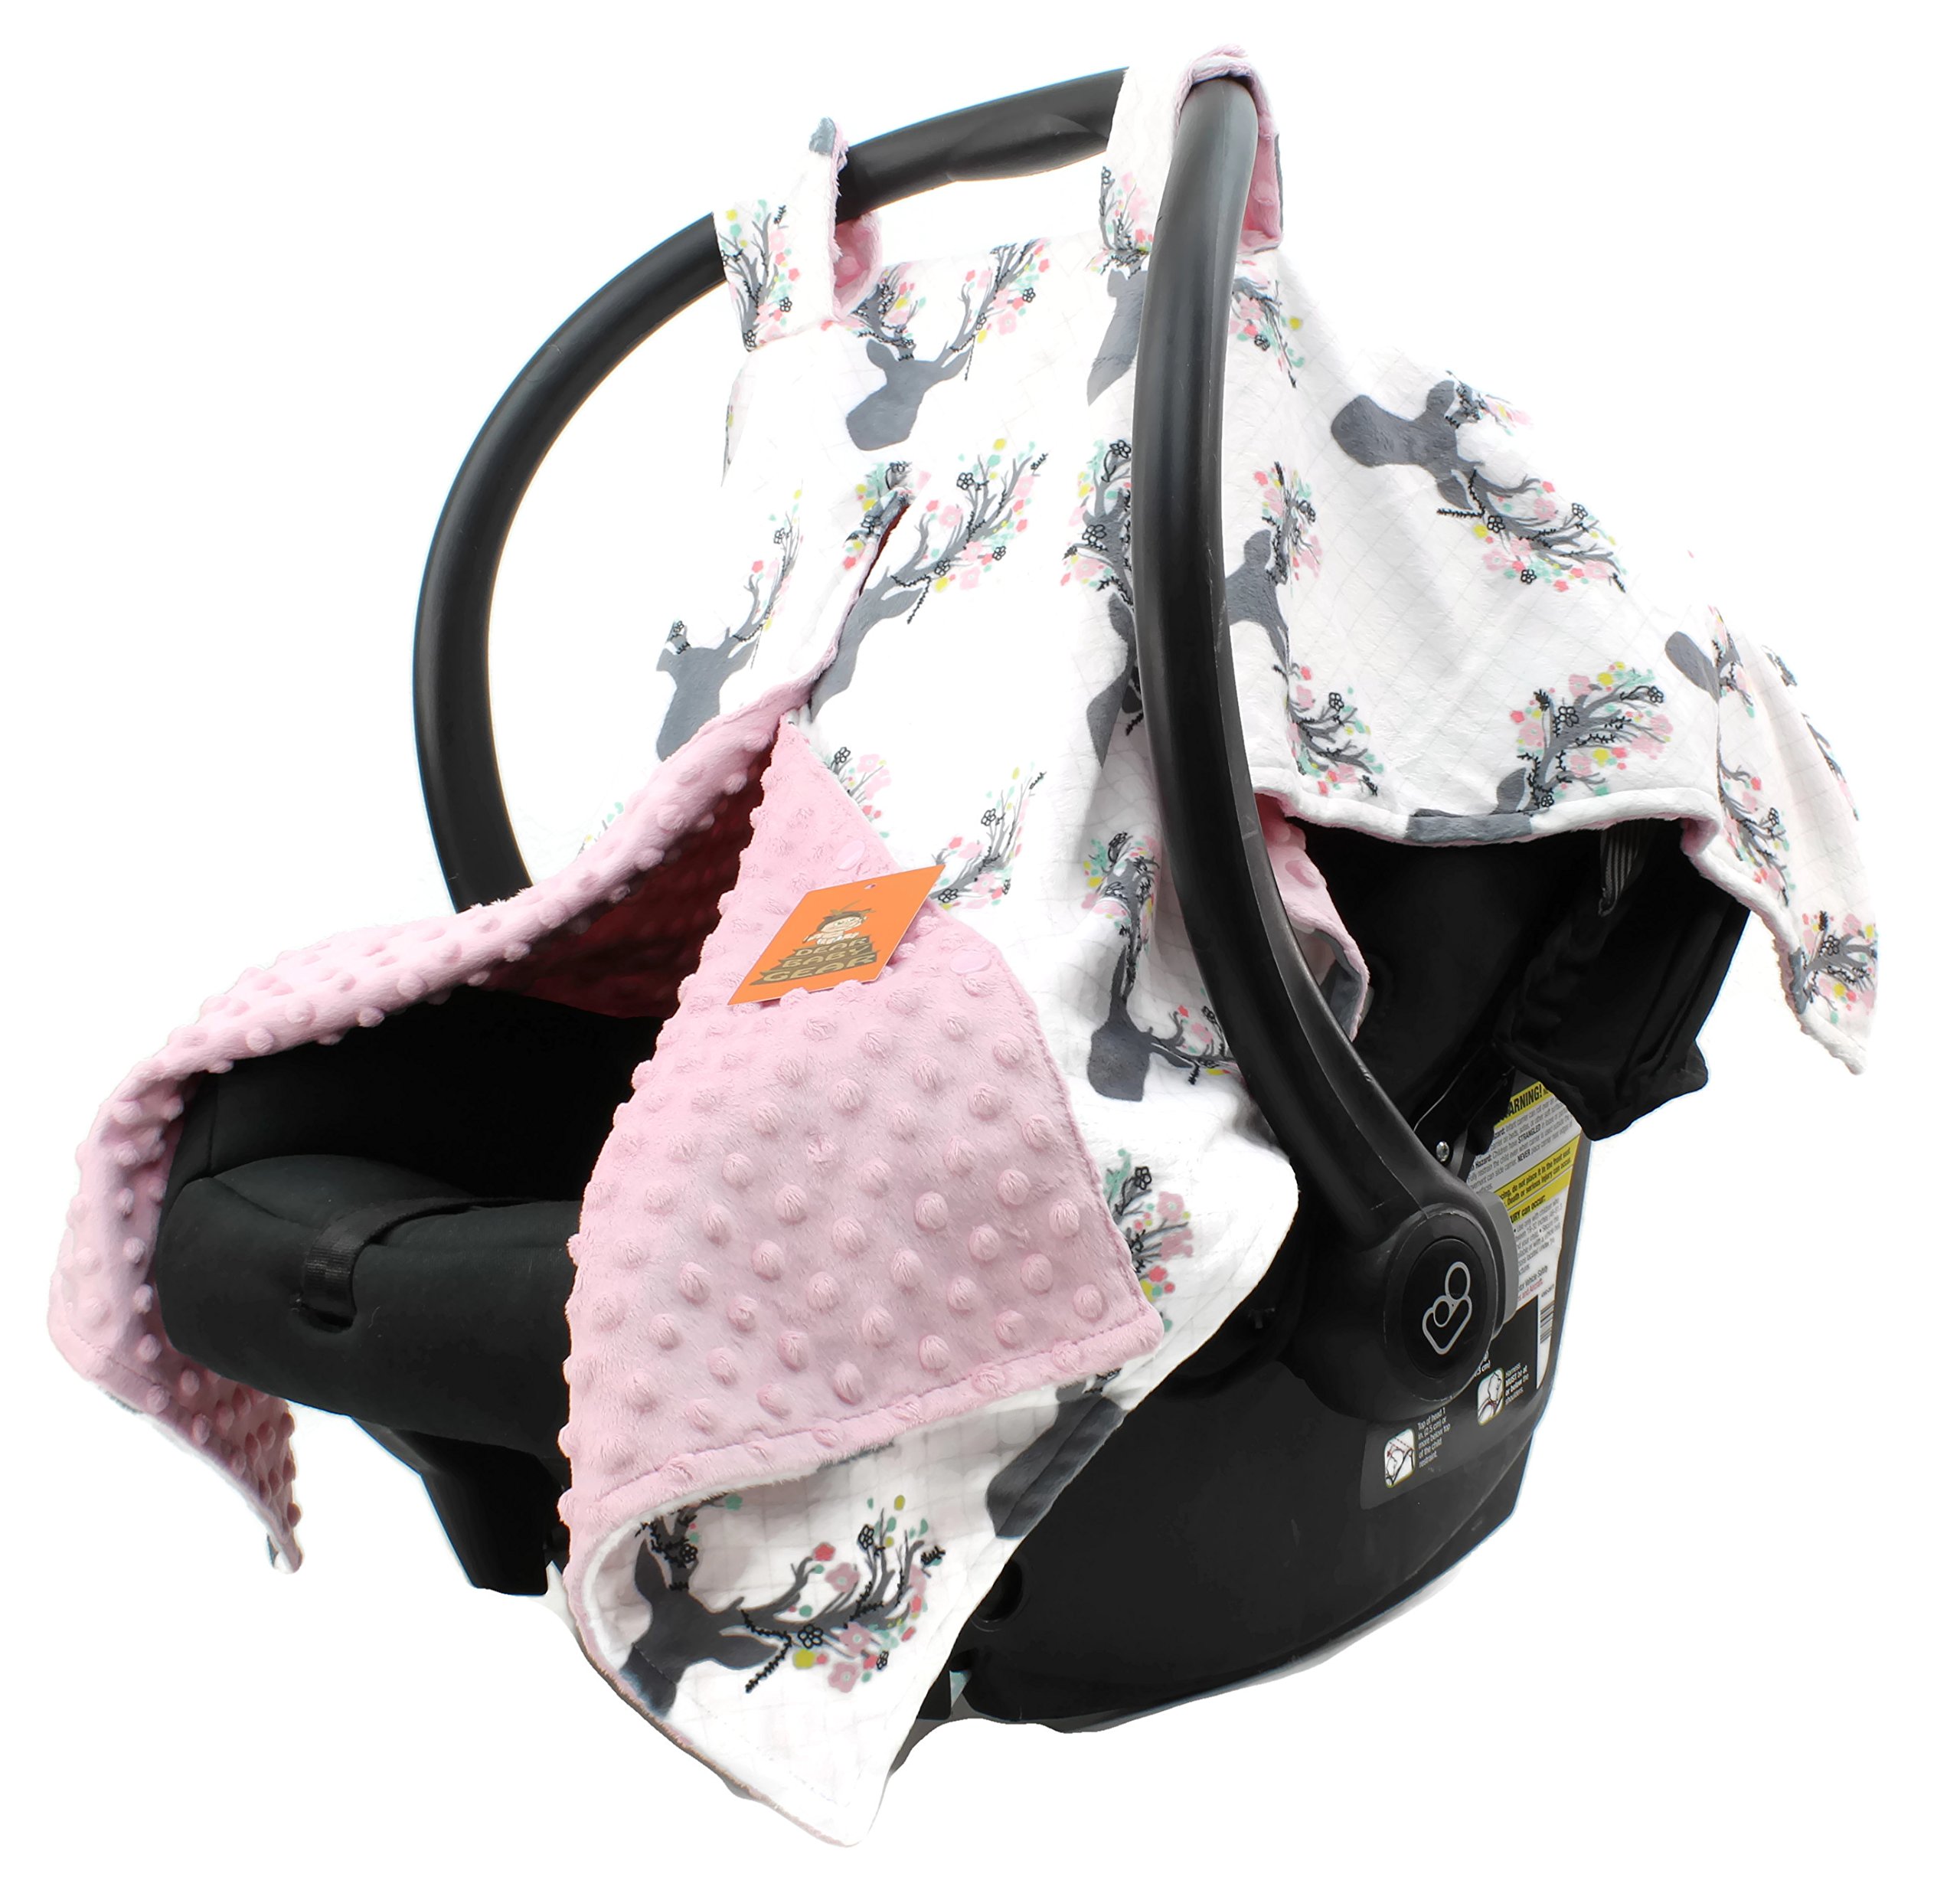 Dear Baby Gear Antlers and Flowers Bundle: Baby Car Seat Canopy and Baby Blanket - Pink Minky and Floral Design for Baby Girls - Snap Opening, Lightweight Carseat Cover, Warm Crib Quilt, and Infant Bl